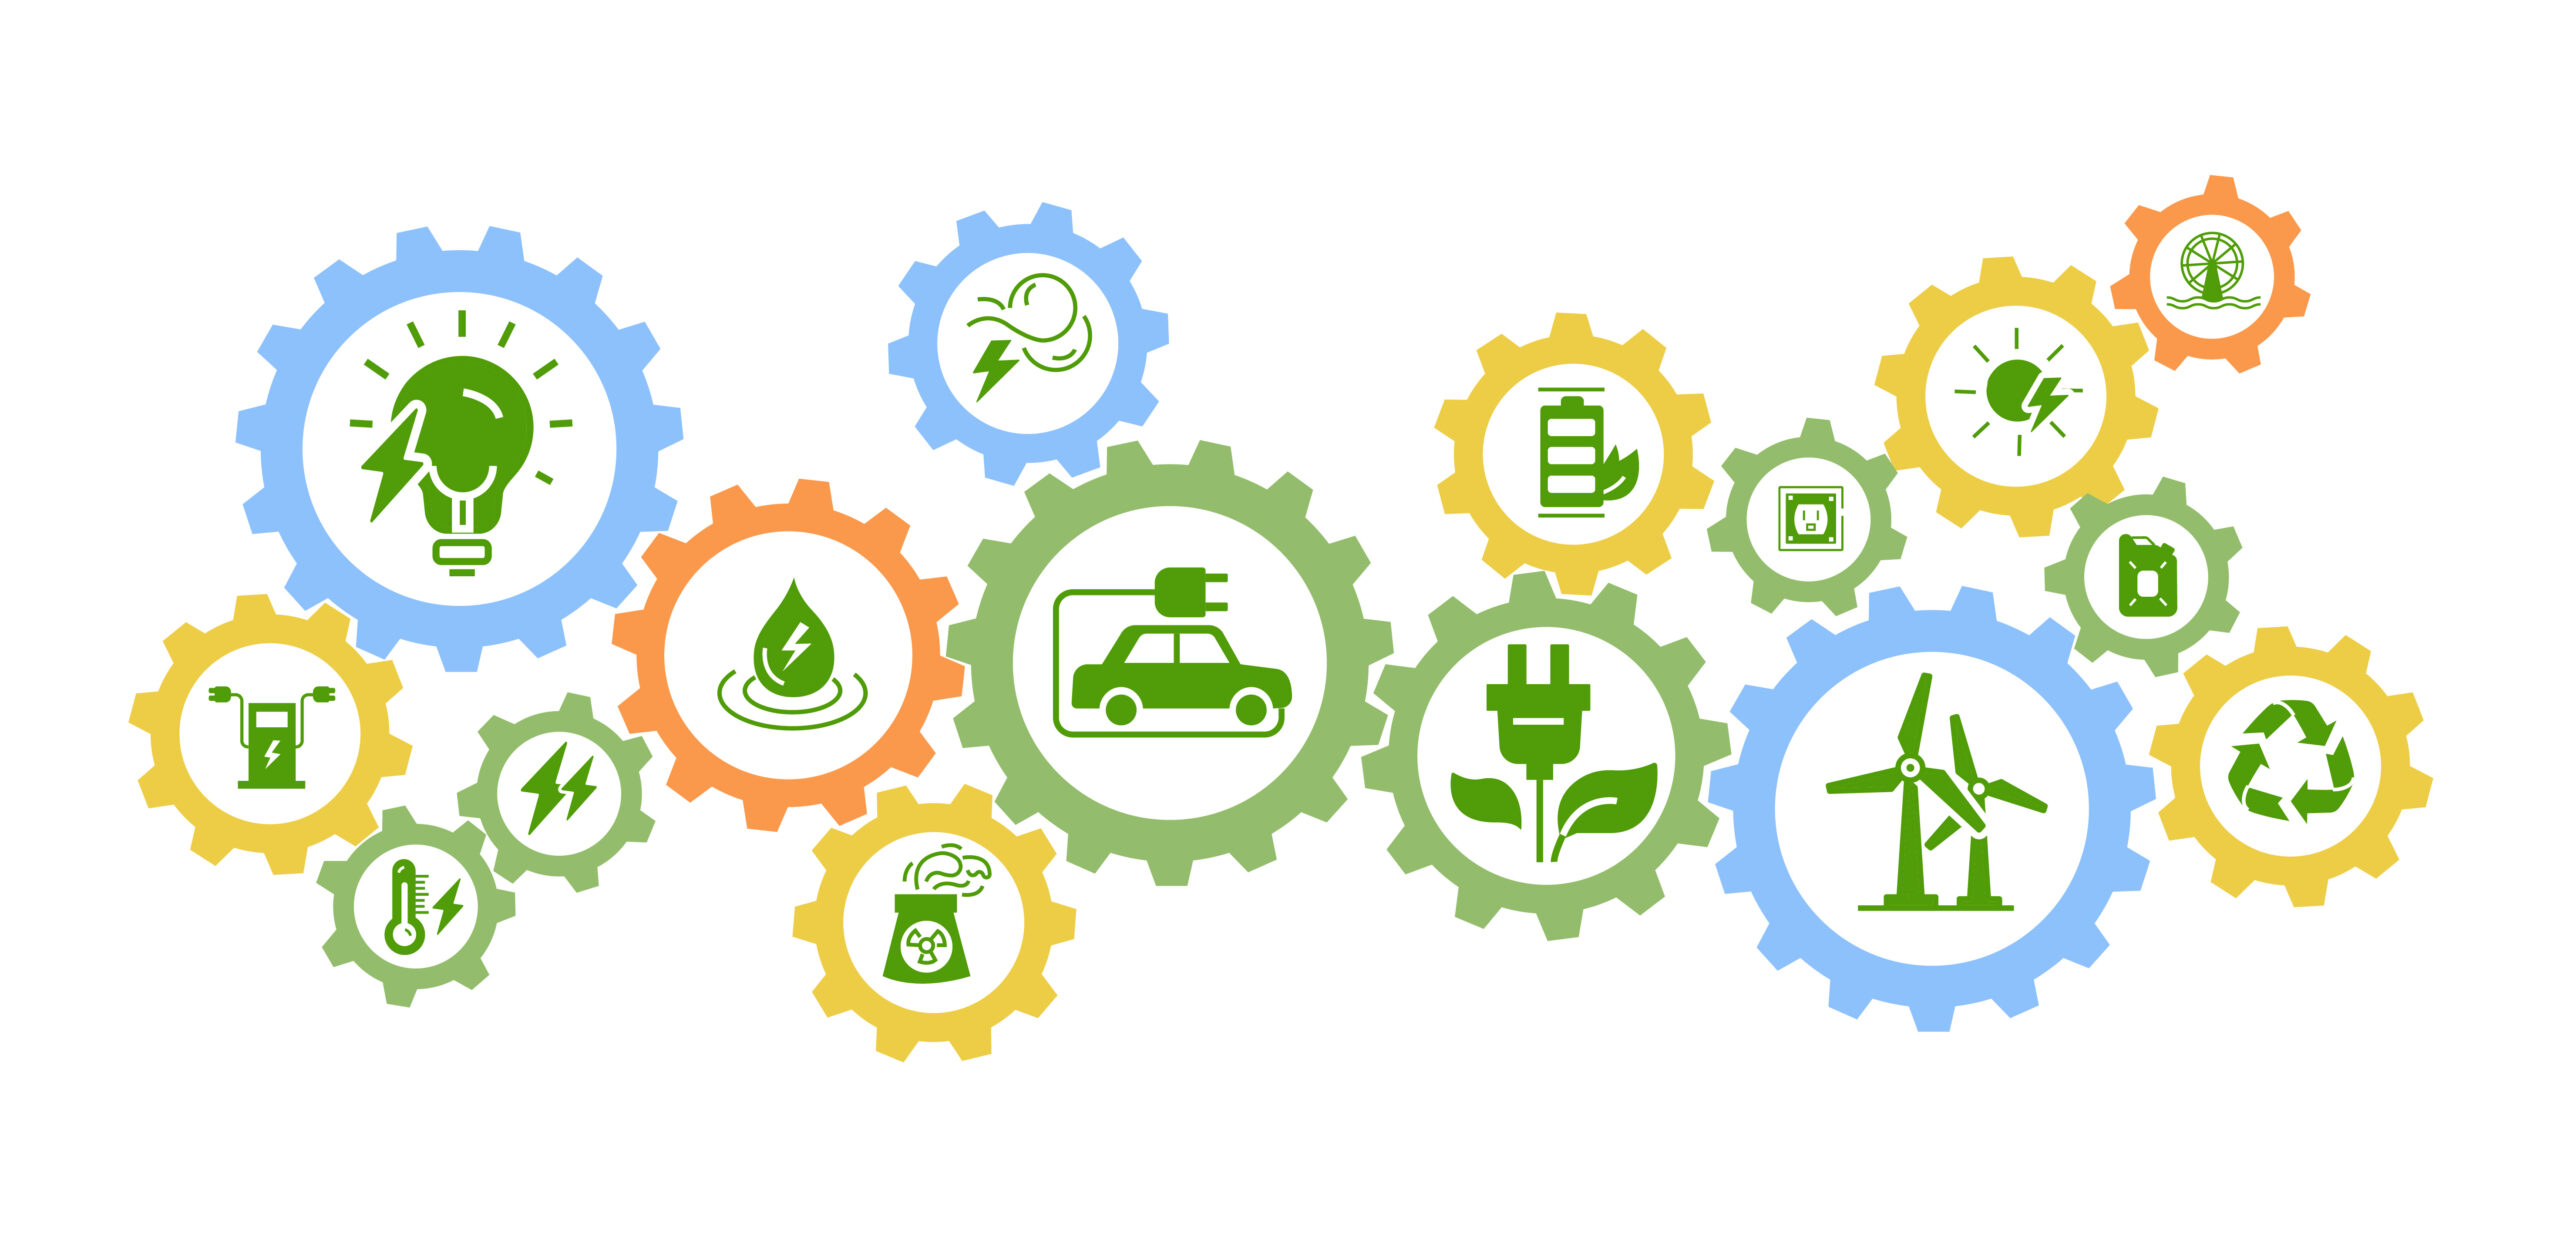 Energy sources banner. Caring for nature and environment. Wind generators and hydro station, electric vehicle and car. Recycling and reuse. Flat vector illustrations isolated on white background